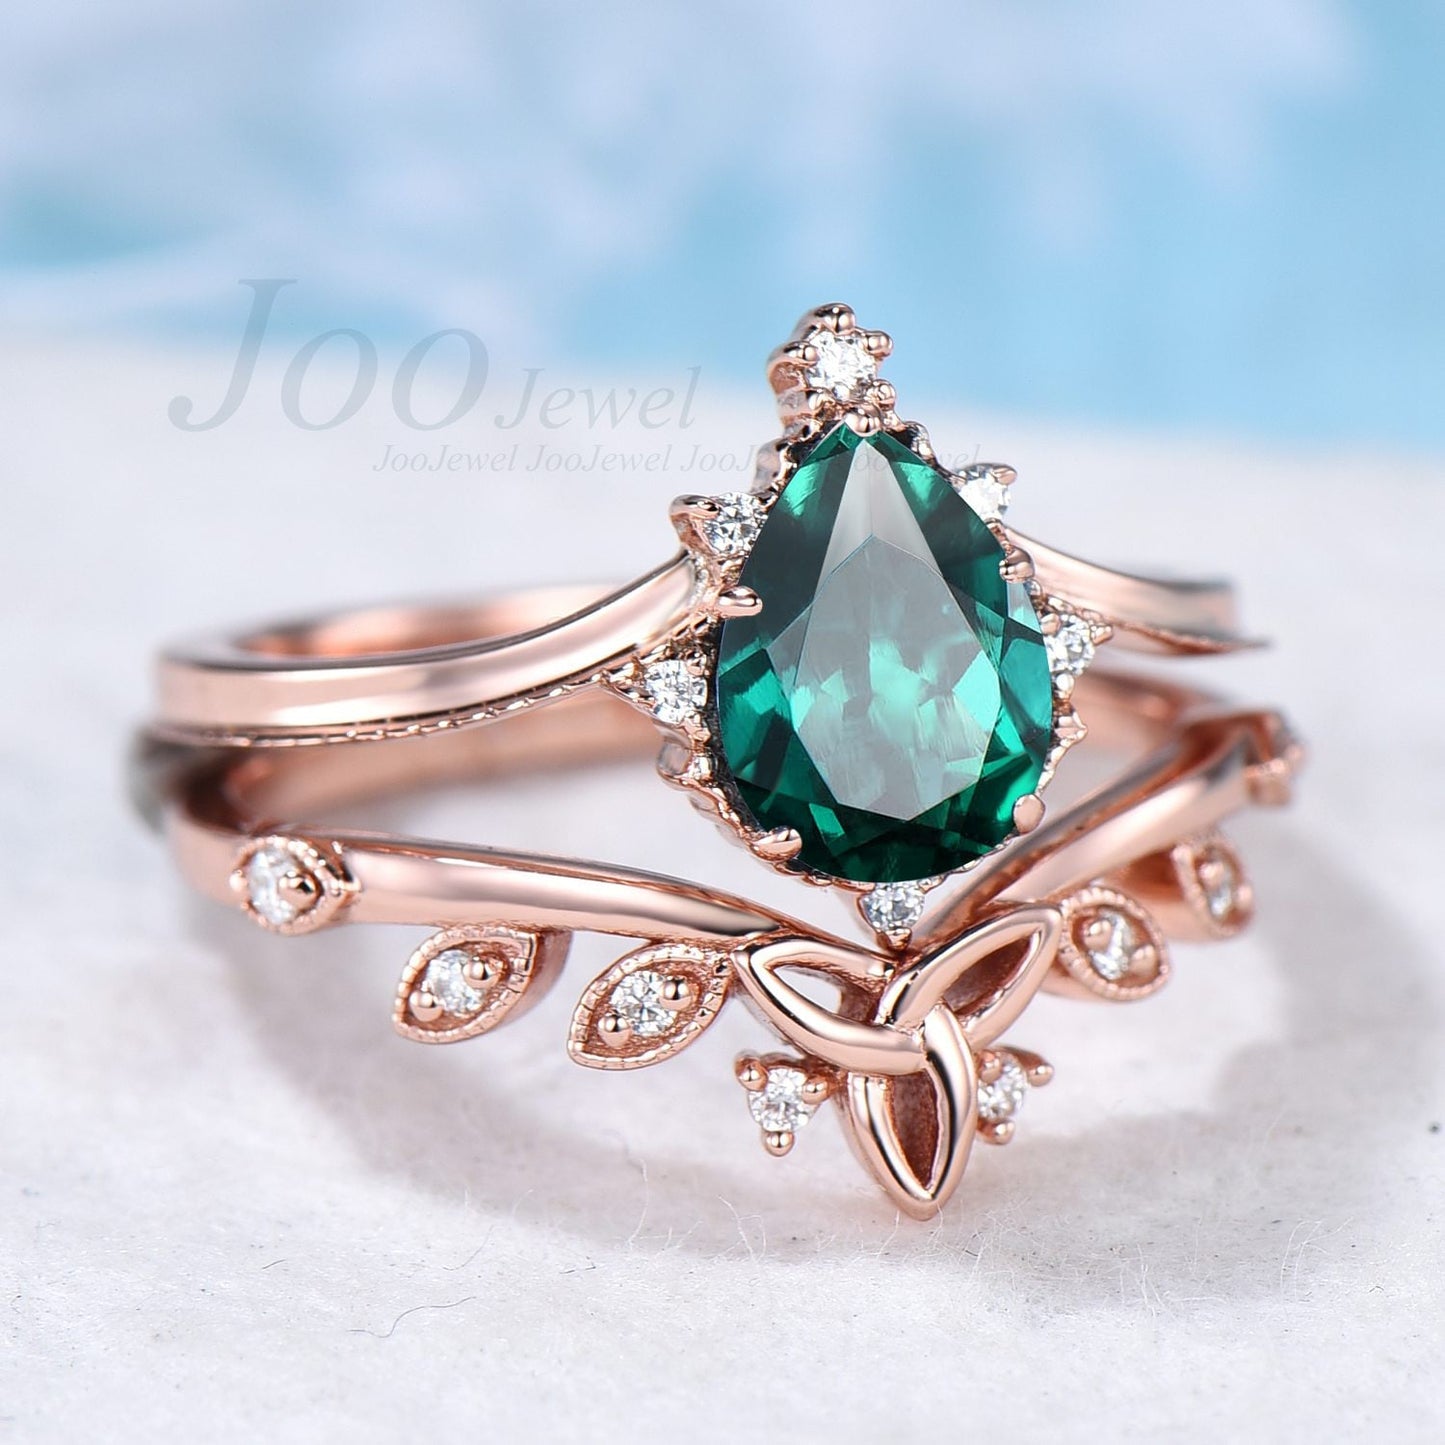 Emerald Ring Set Sterling Silver Antique Green Gemstone Ring Pear Engagement Ring Set Celtic Wedding Band May Birthstone Jewelry Bridal Ring